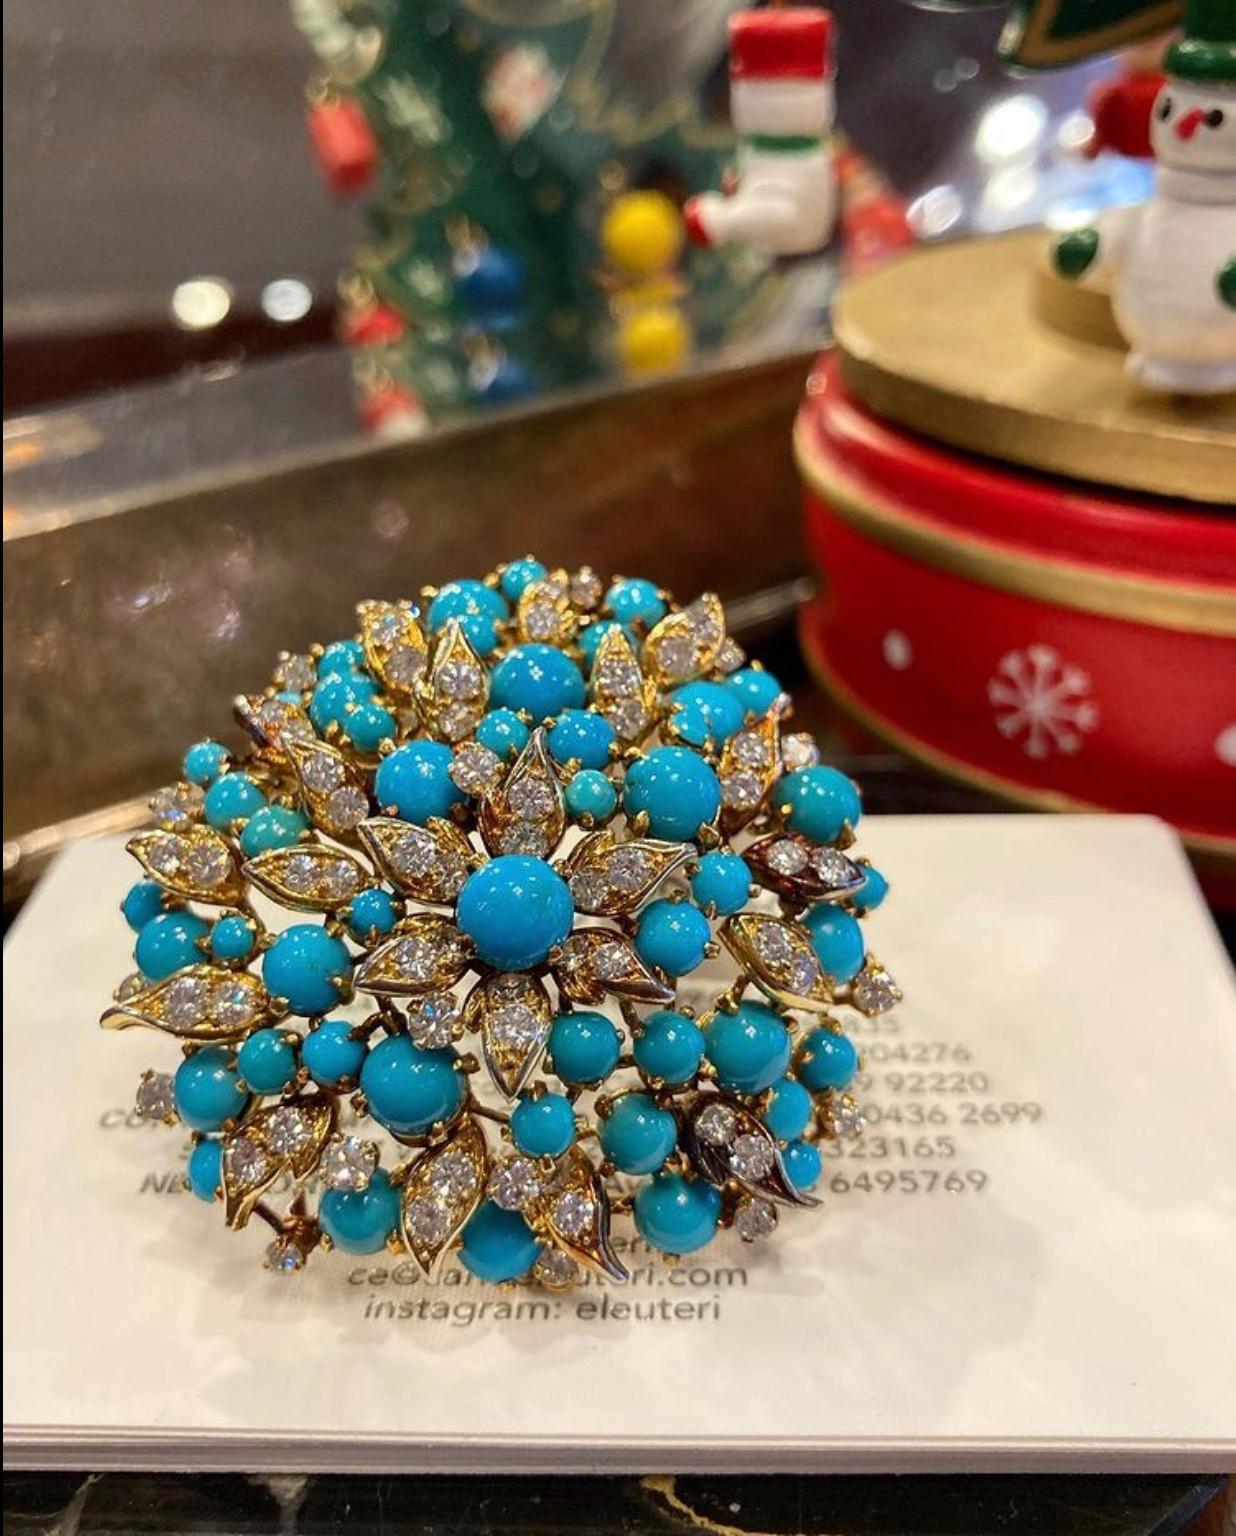 An exquisite Bulgari cluster brooch embellished with cabochon Persian turquoise and brilliant cut diamonds, mounted on 18 karat yellow gold. Made in Italy, circa 1960s.